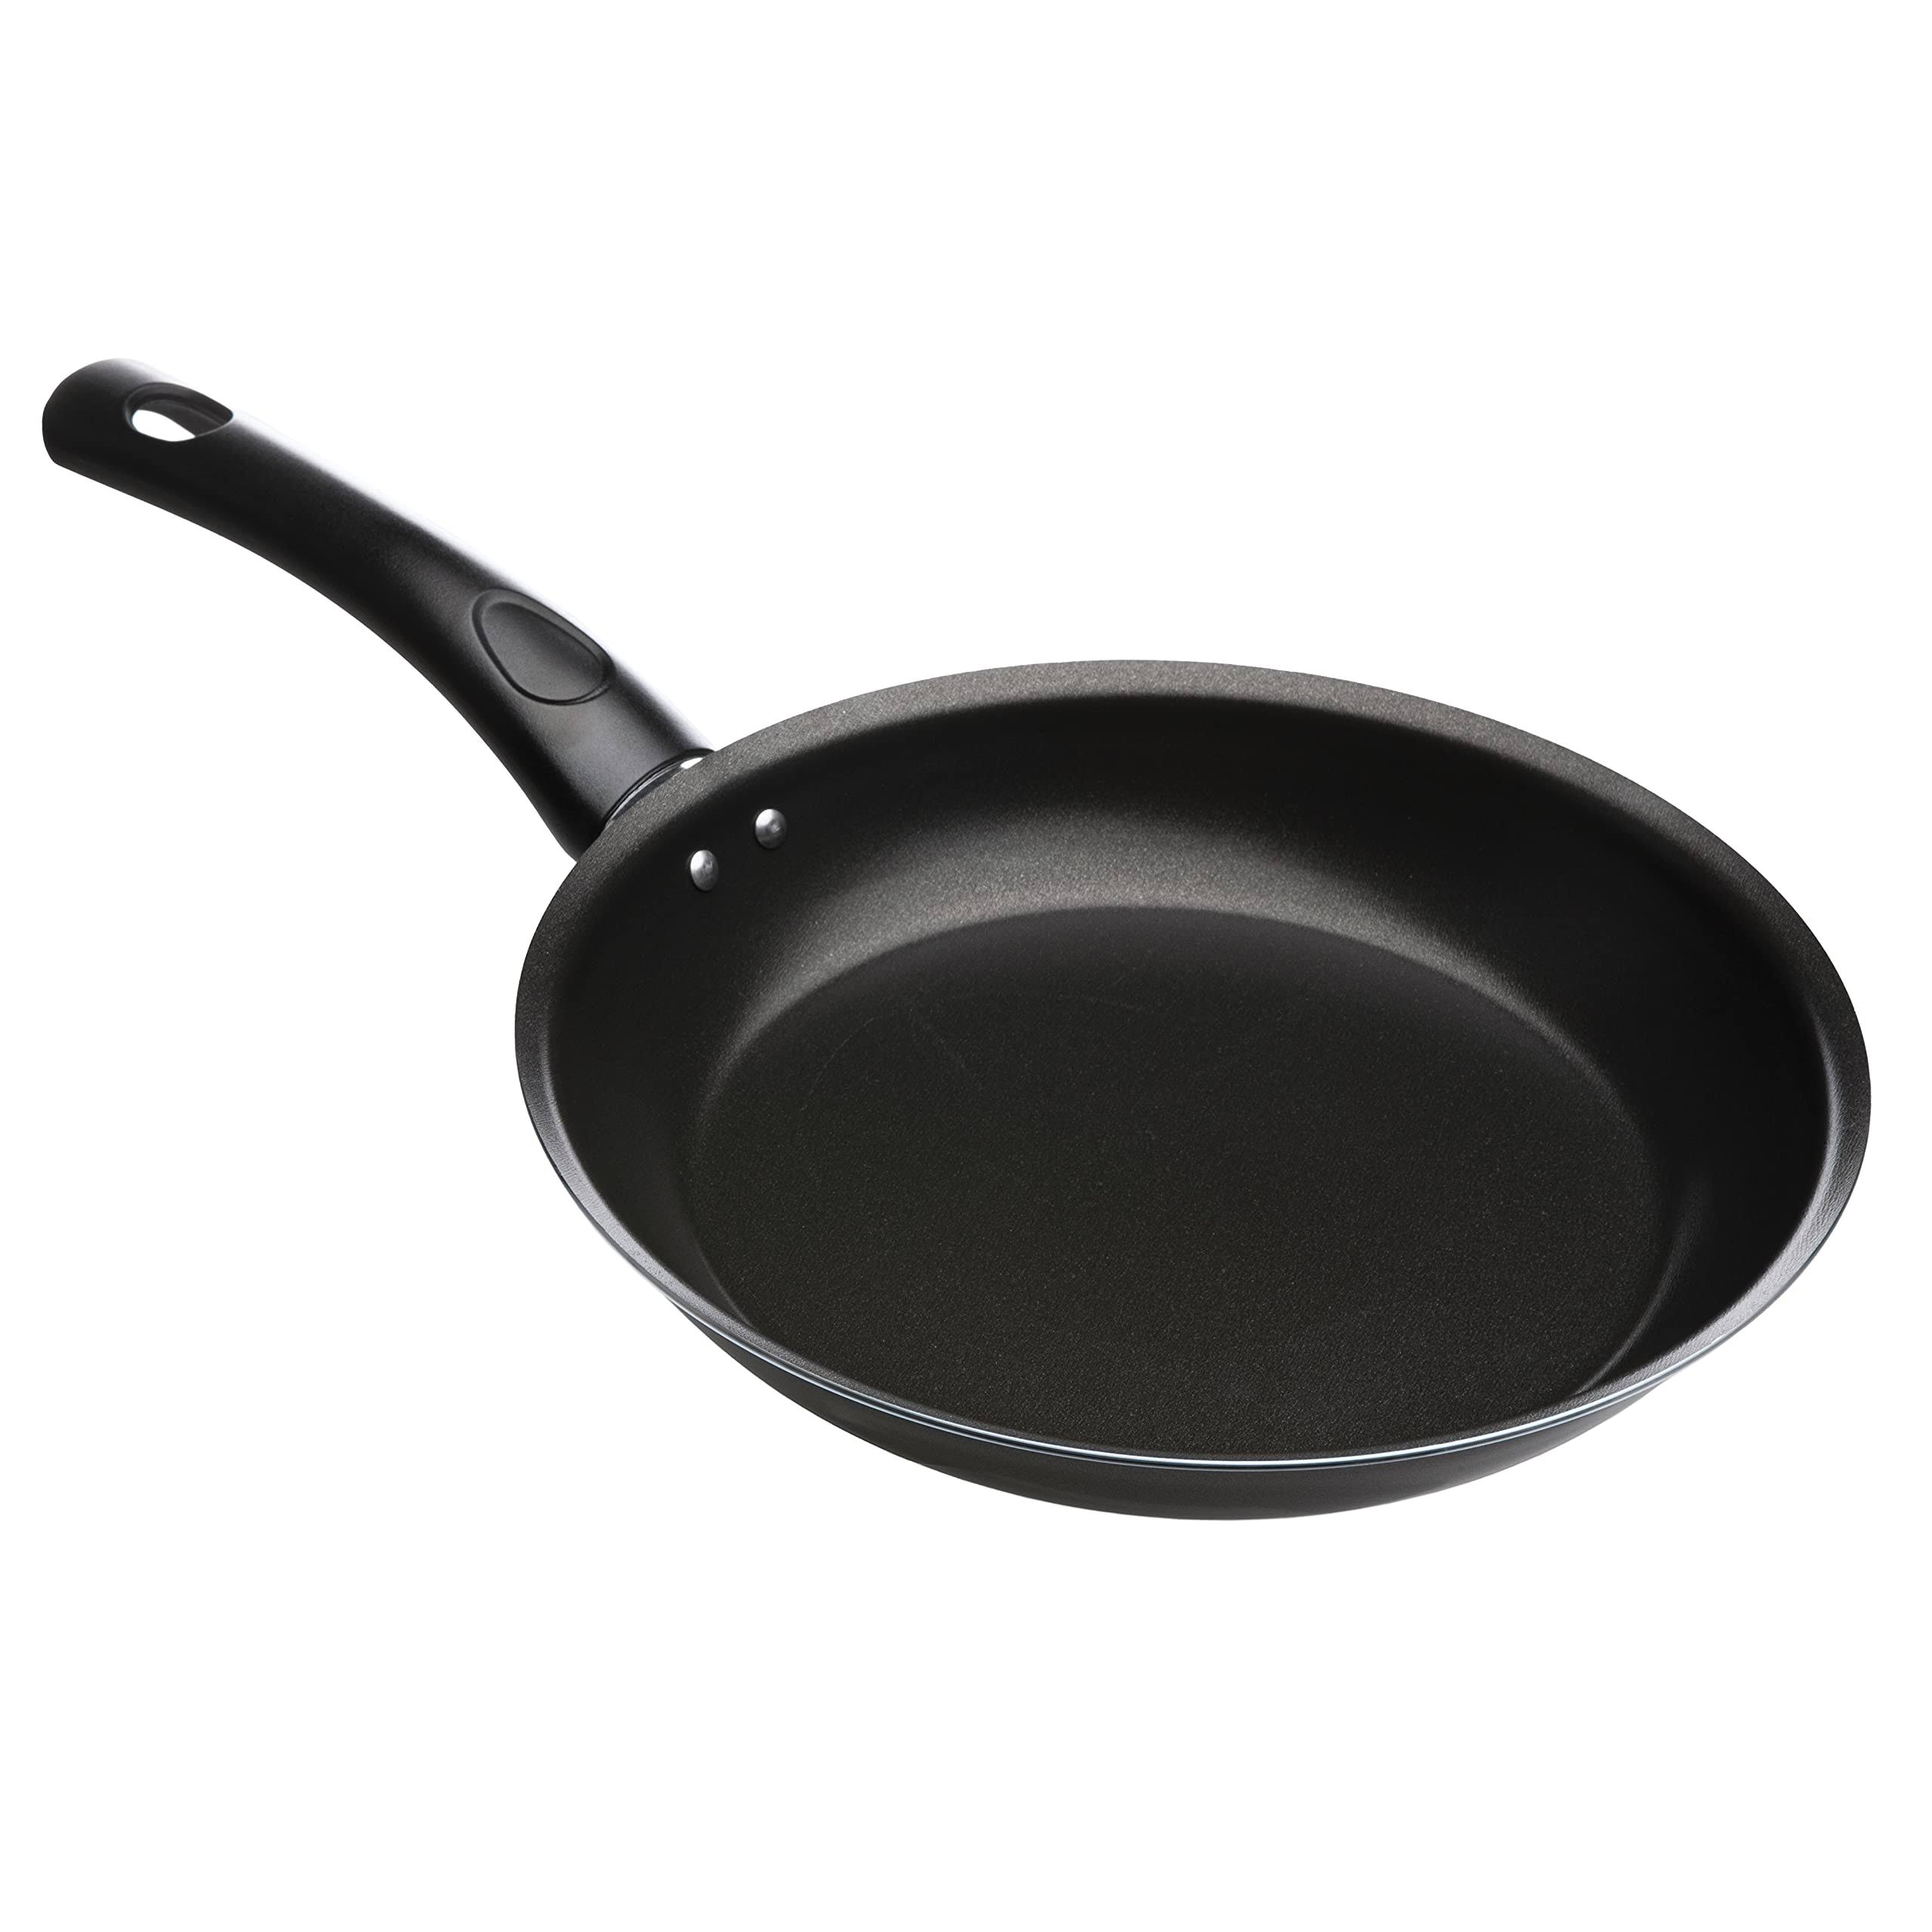 Pendeford Sapphire Non-Stick Frying Pan - 10"